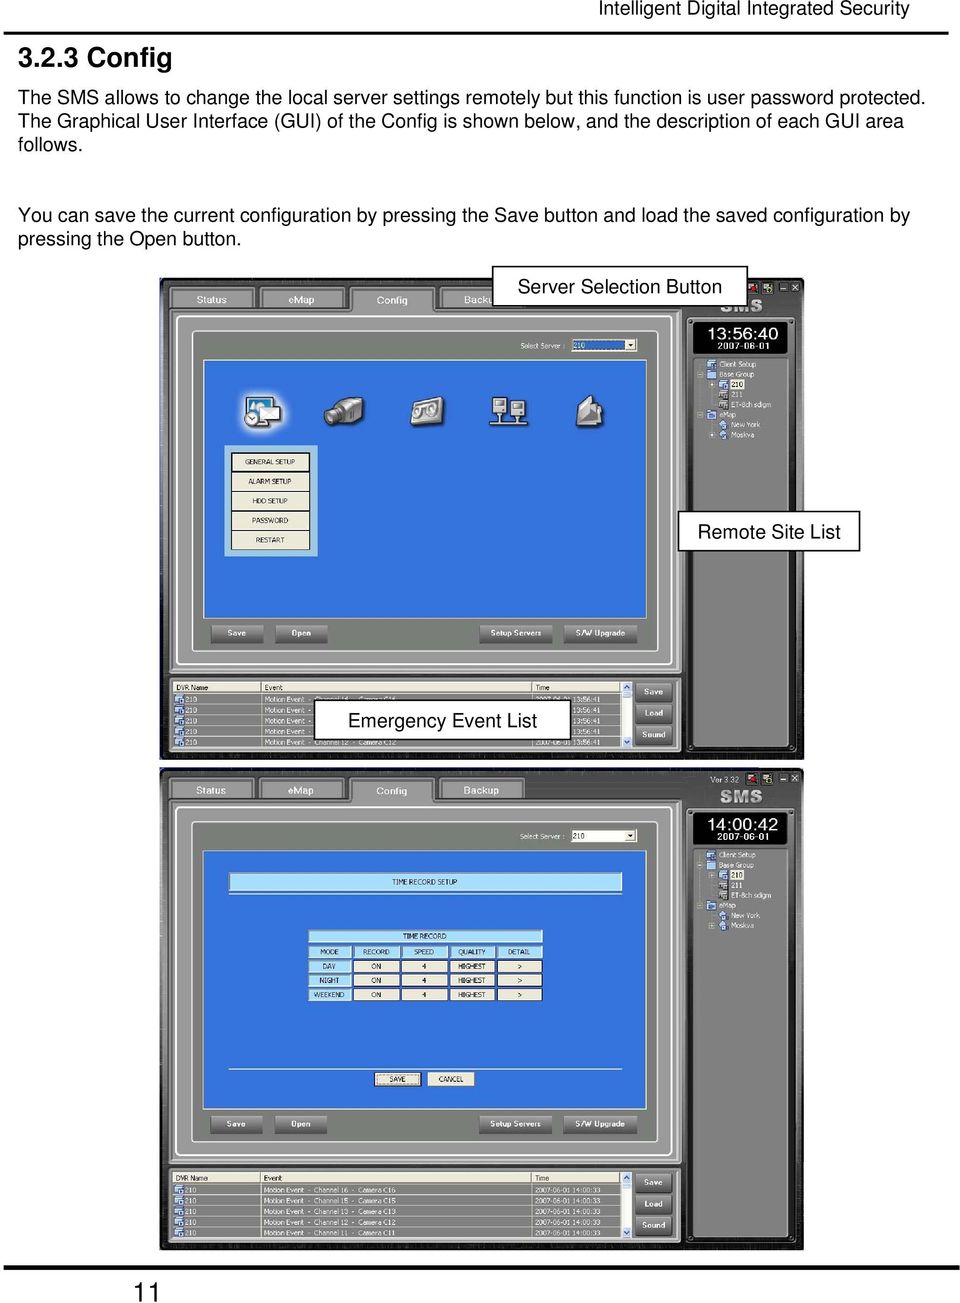 The Graphical User Interface (GUI) of the Config is shown below, and the description of each GUI area follows.